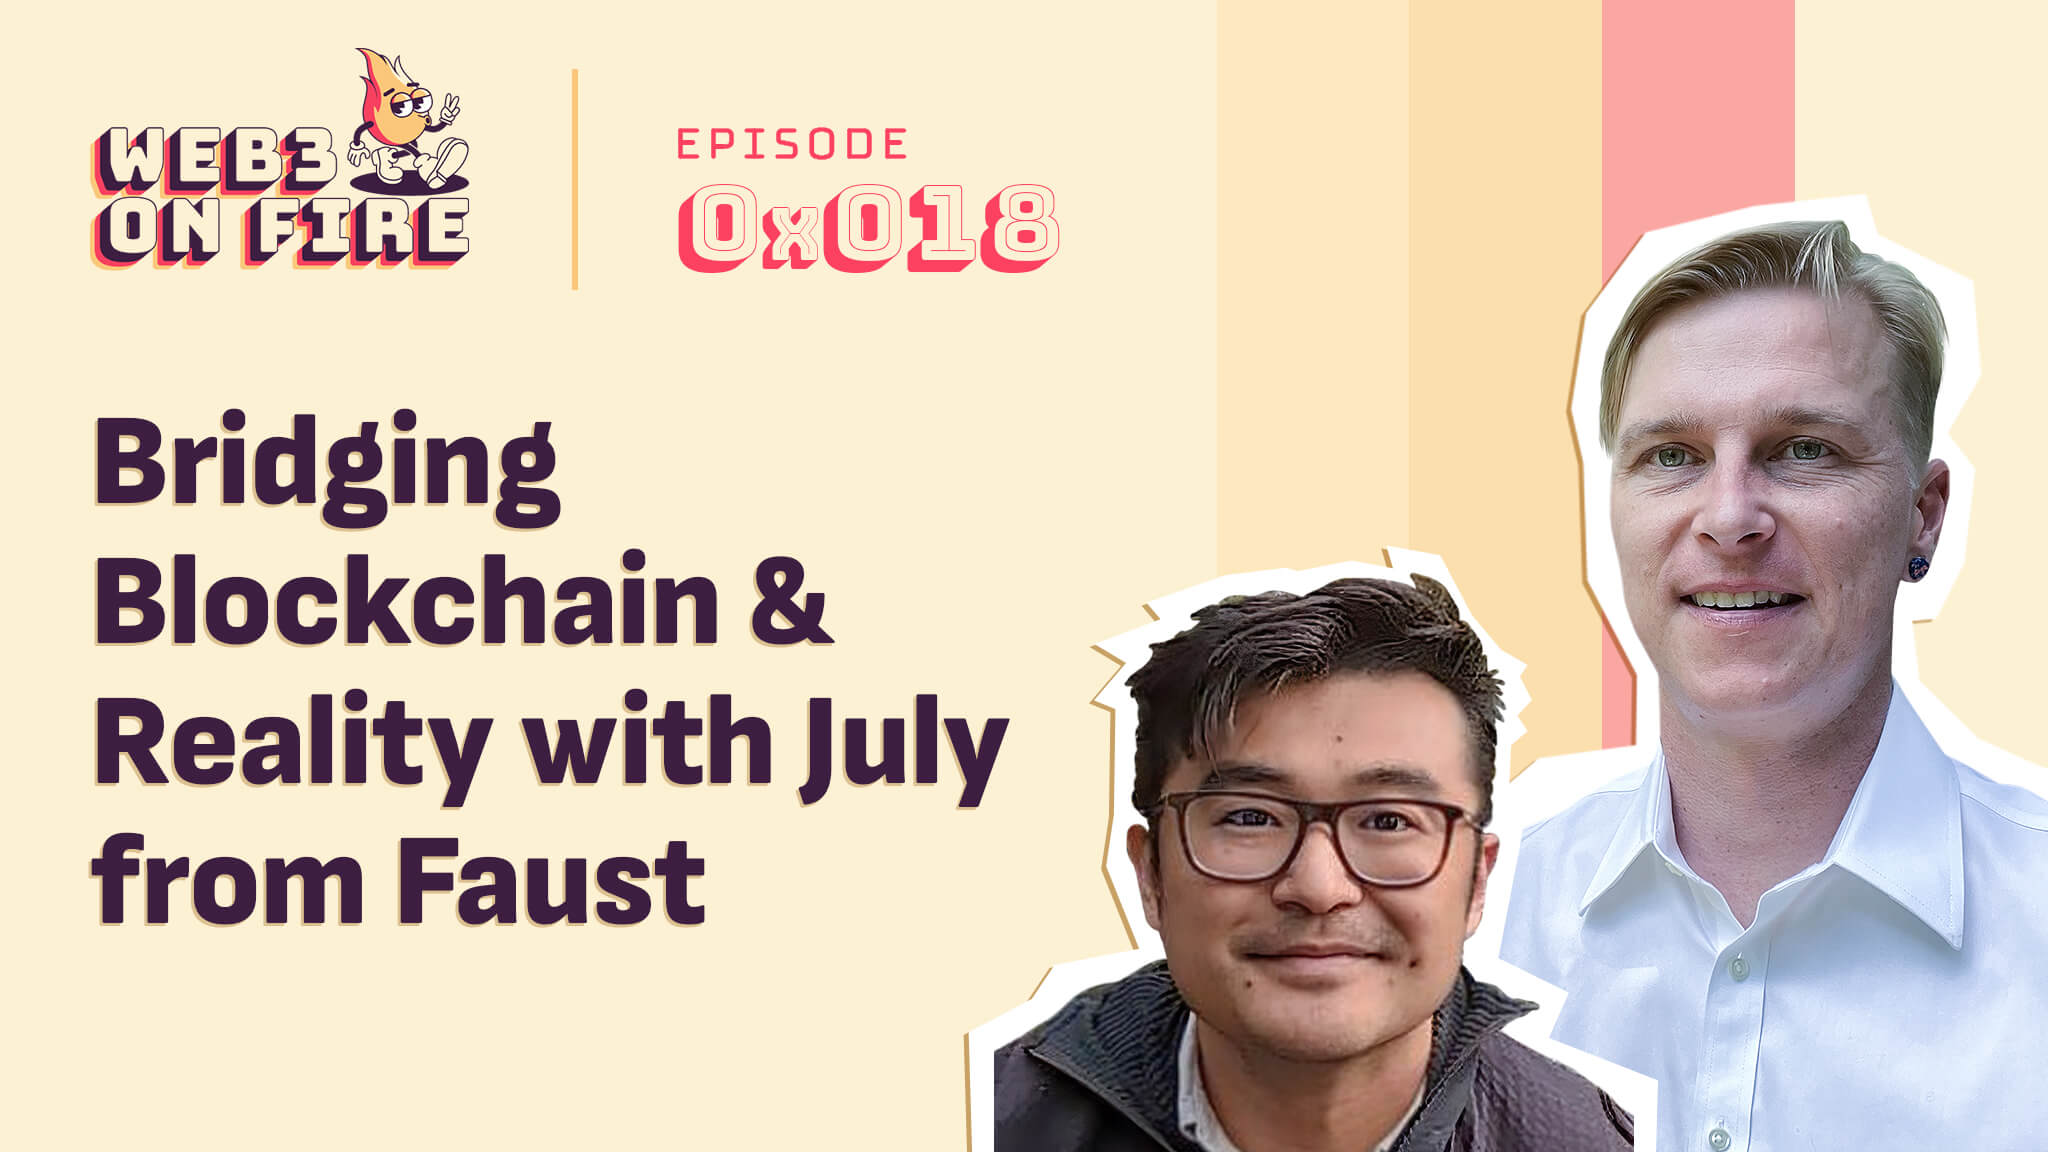 Bridging Blockchain and Reality with July from Faust